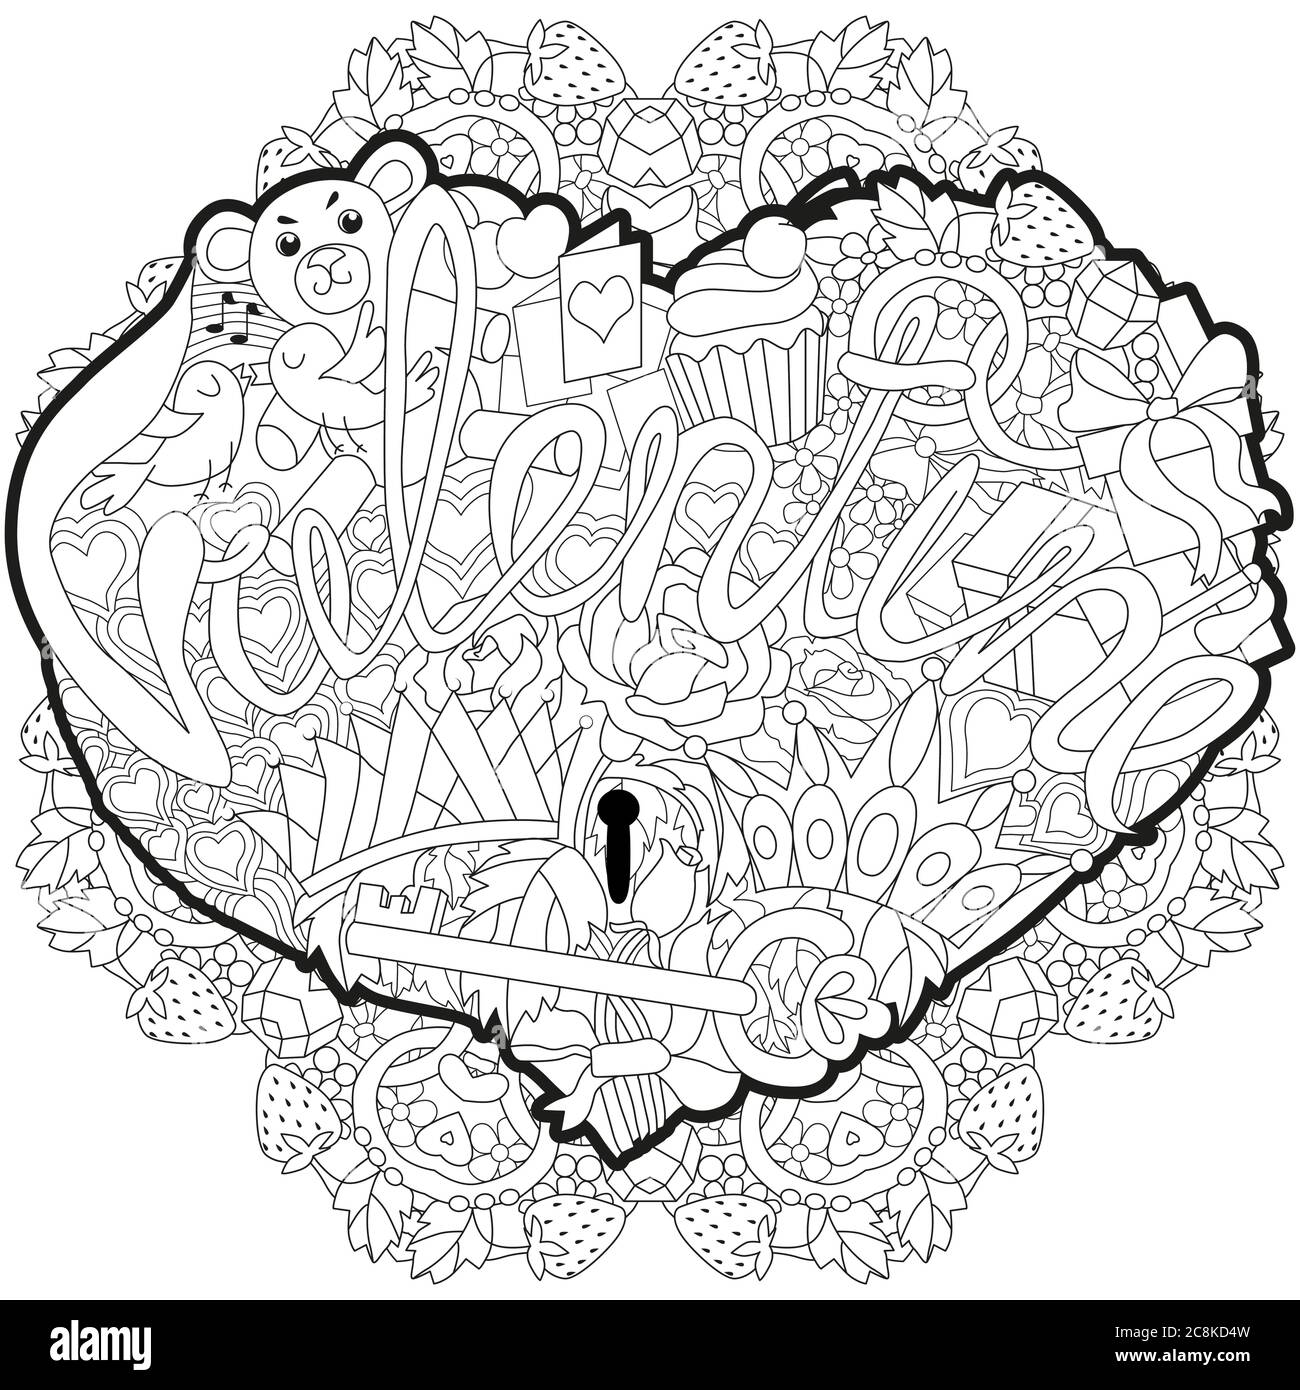 Sketchy doodle heart illustration with word valentine with mandala stock vector image art